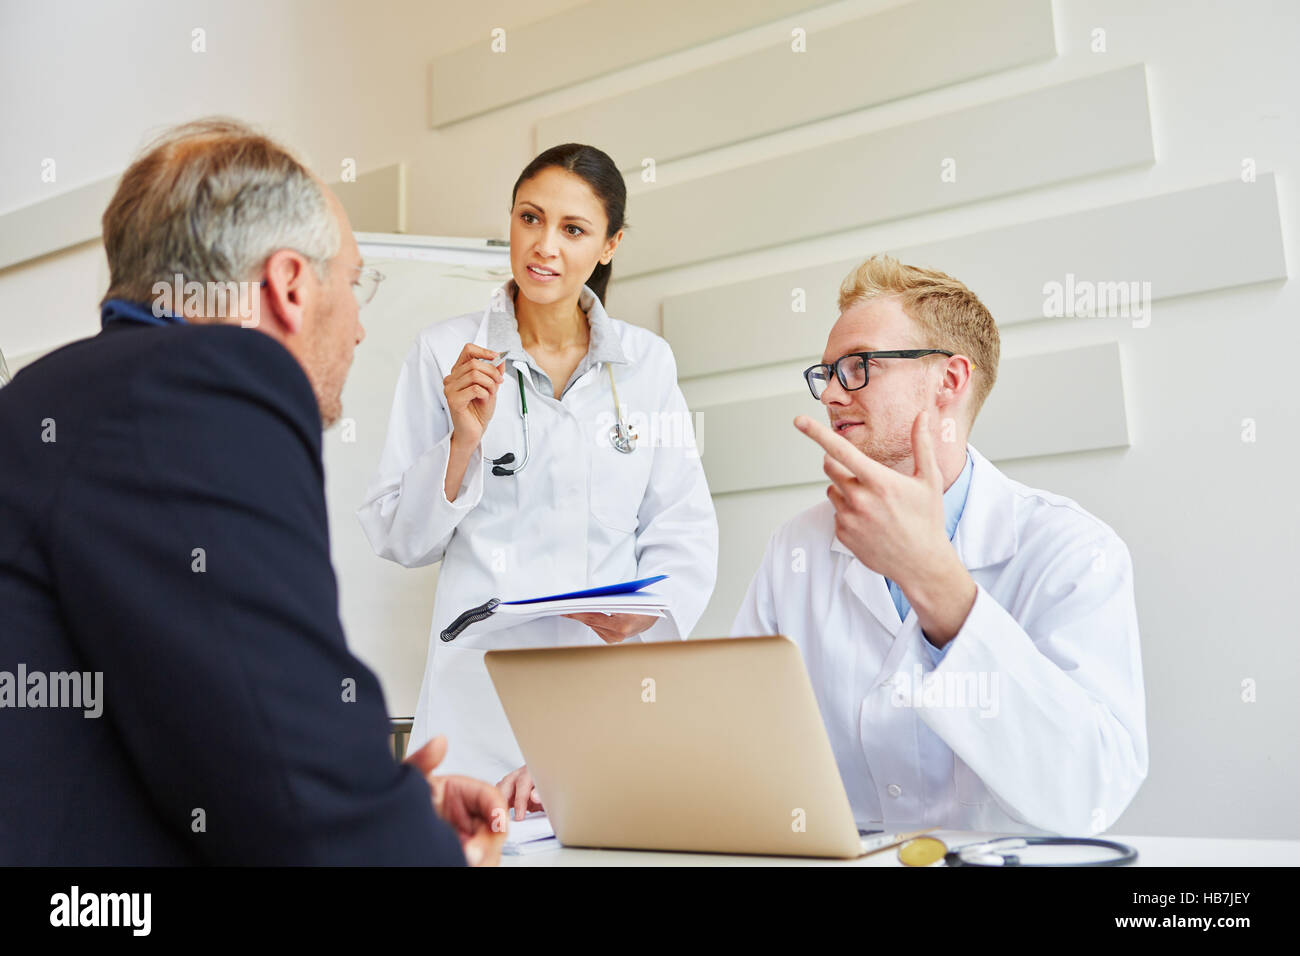 Doctors advicing patient about therapy in consultation Stock Photo